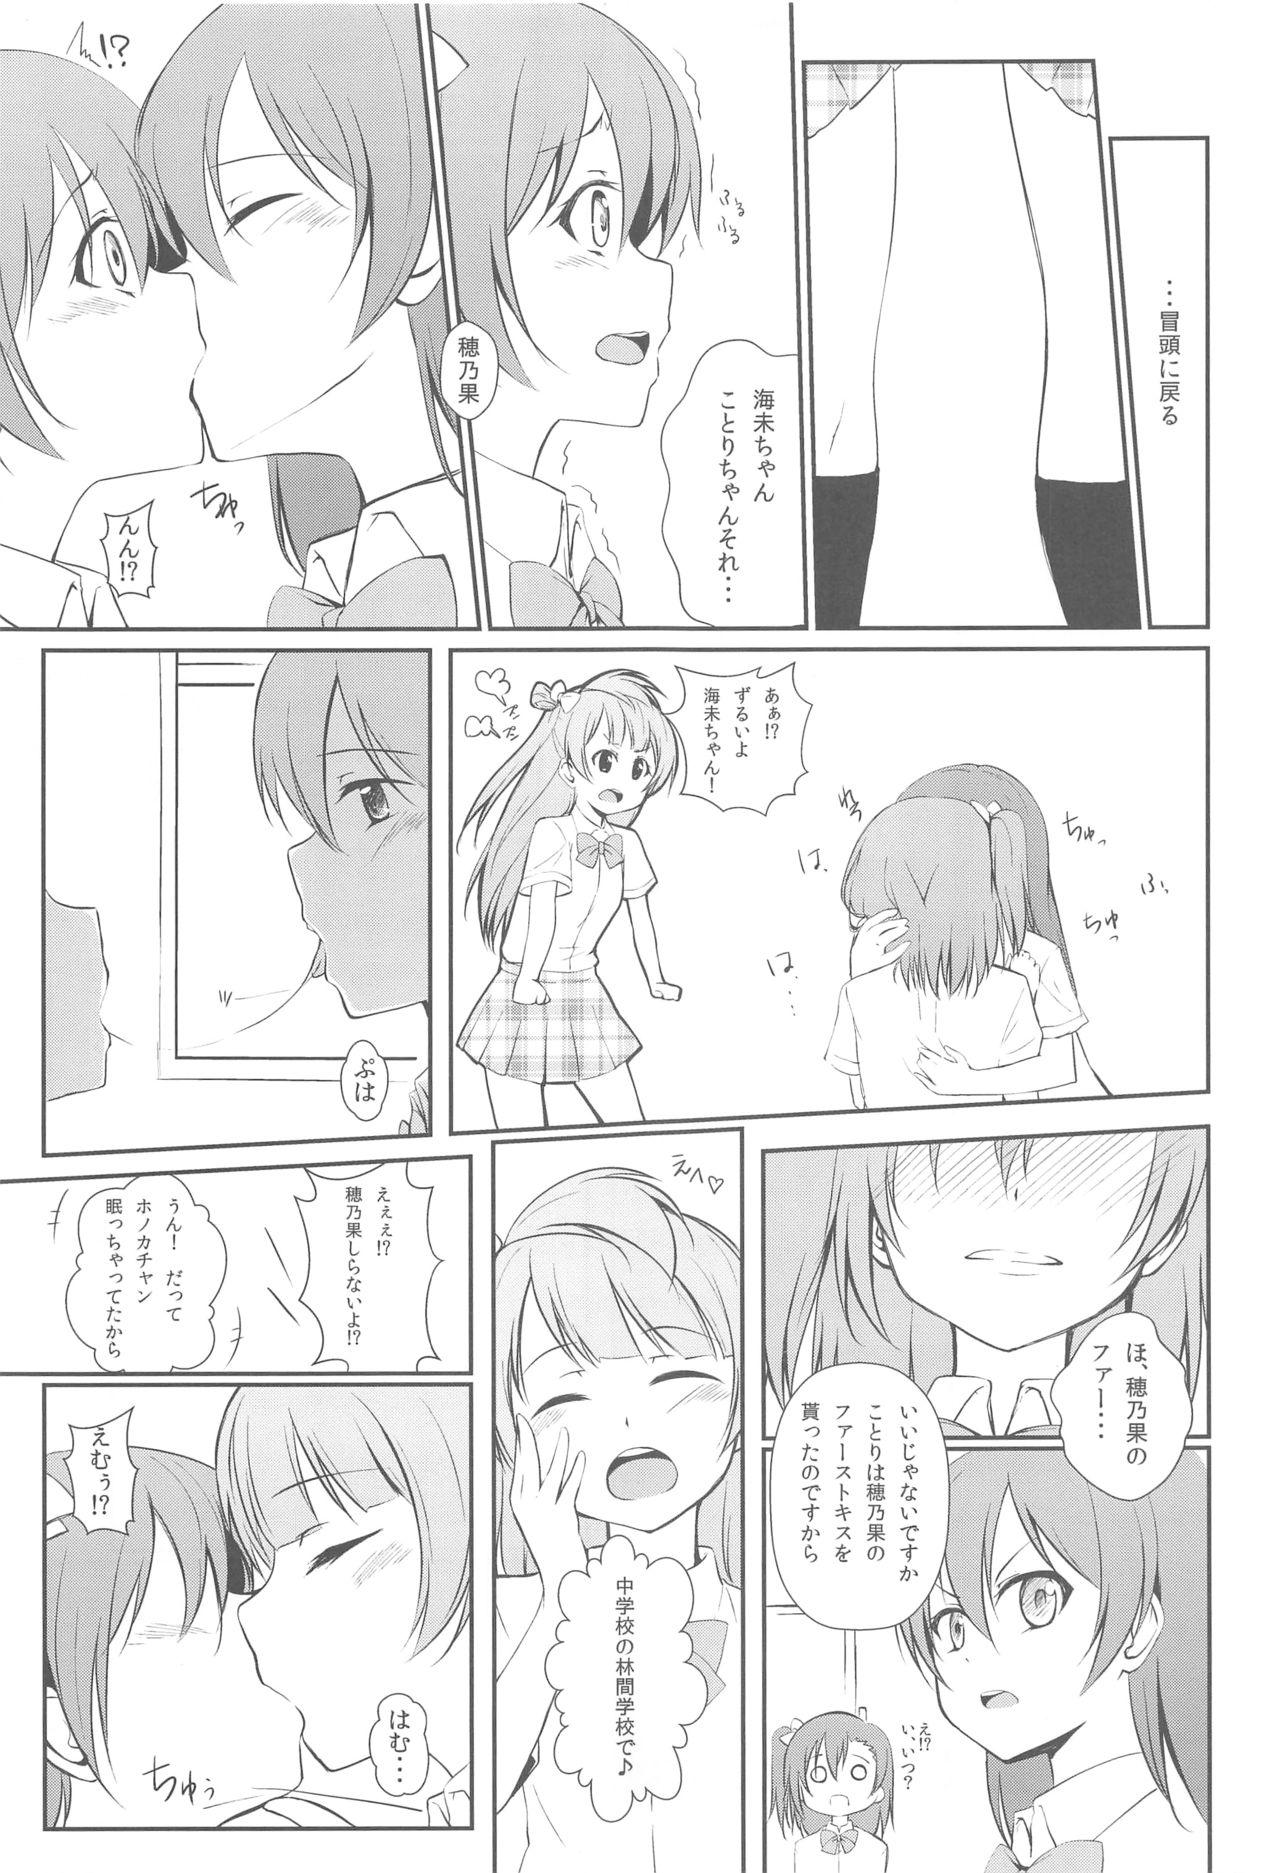 3some UNBALANCED LOVE. - Love live Outdoor - Page 8